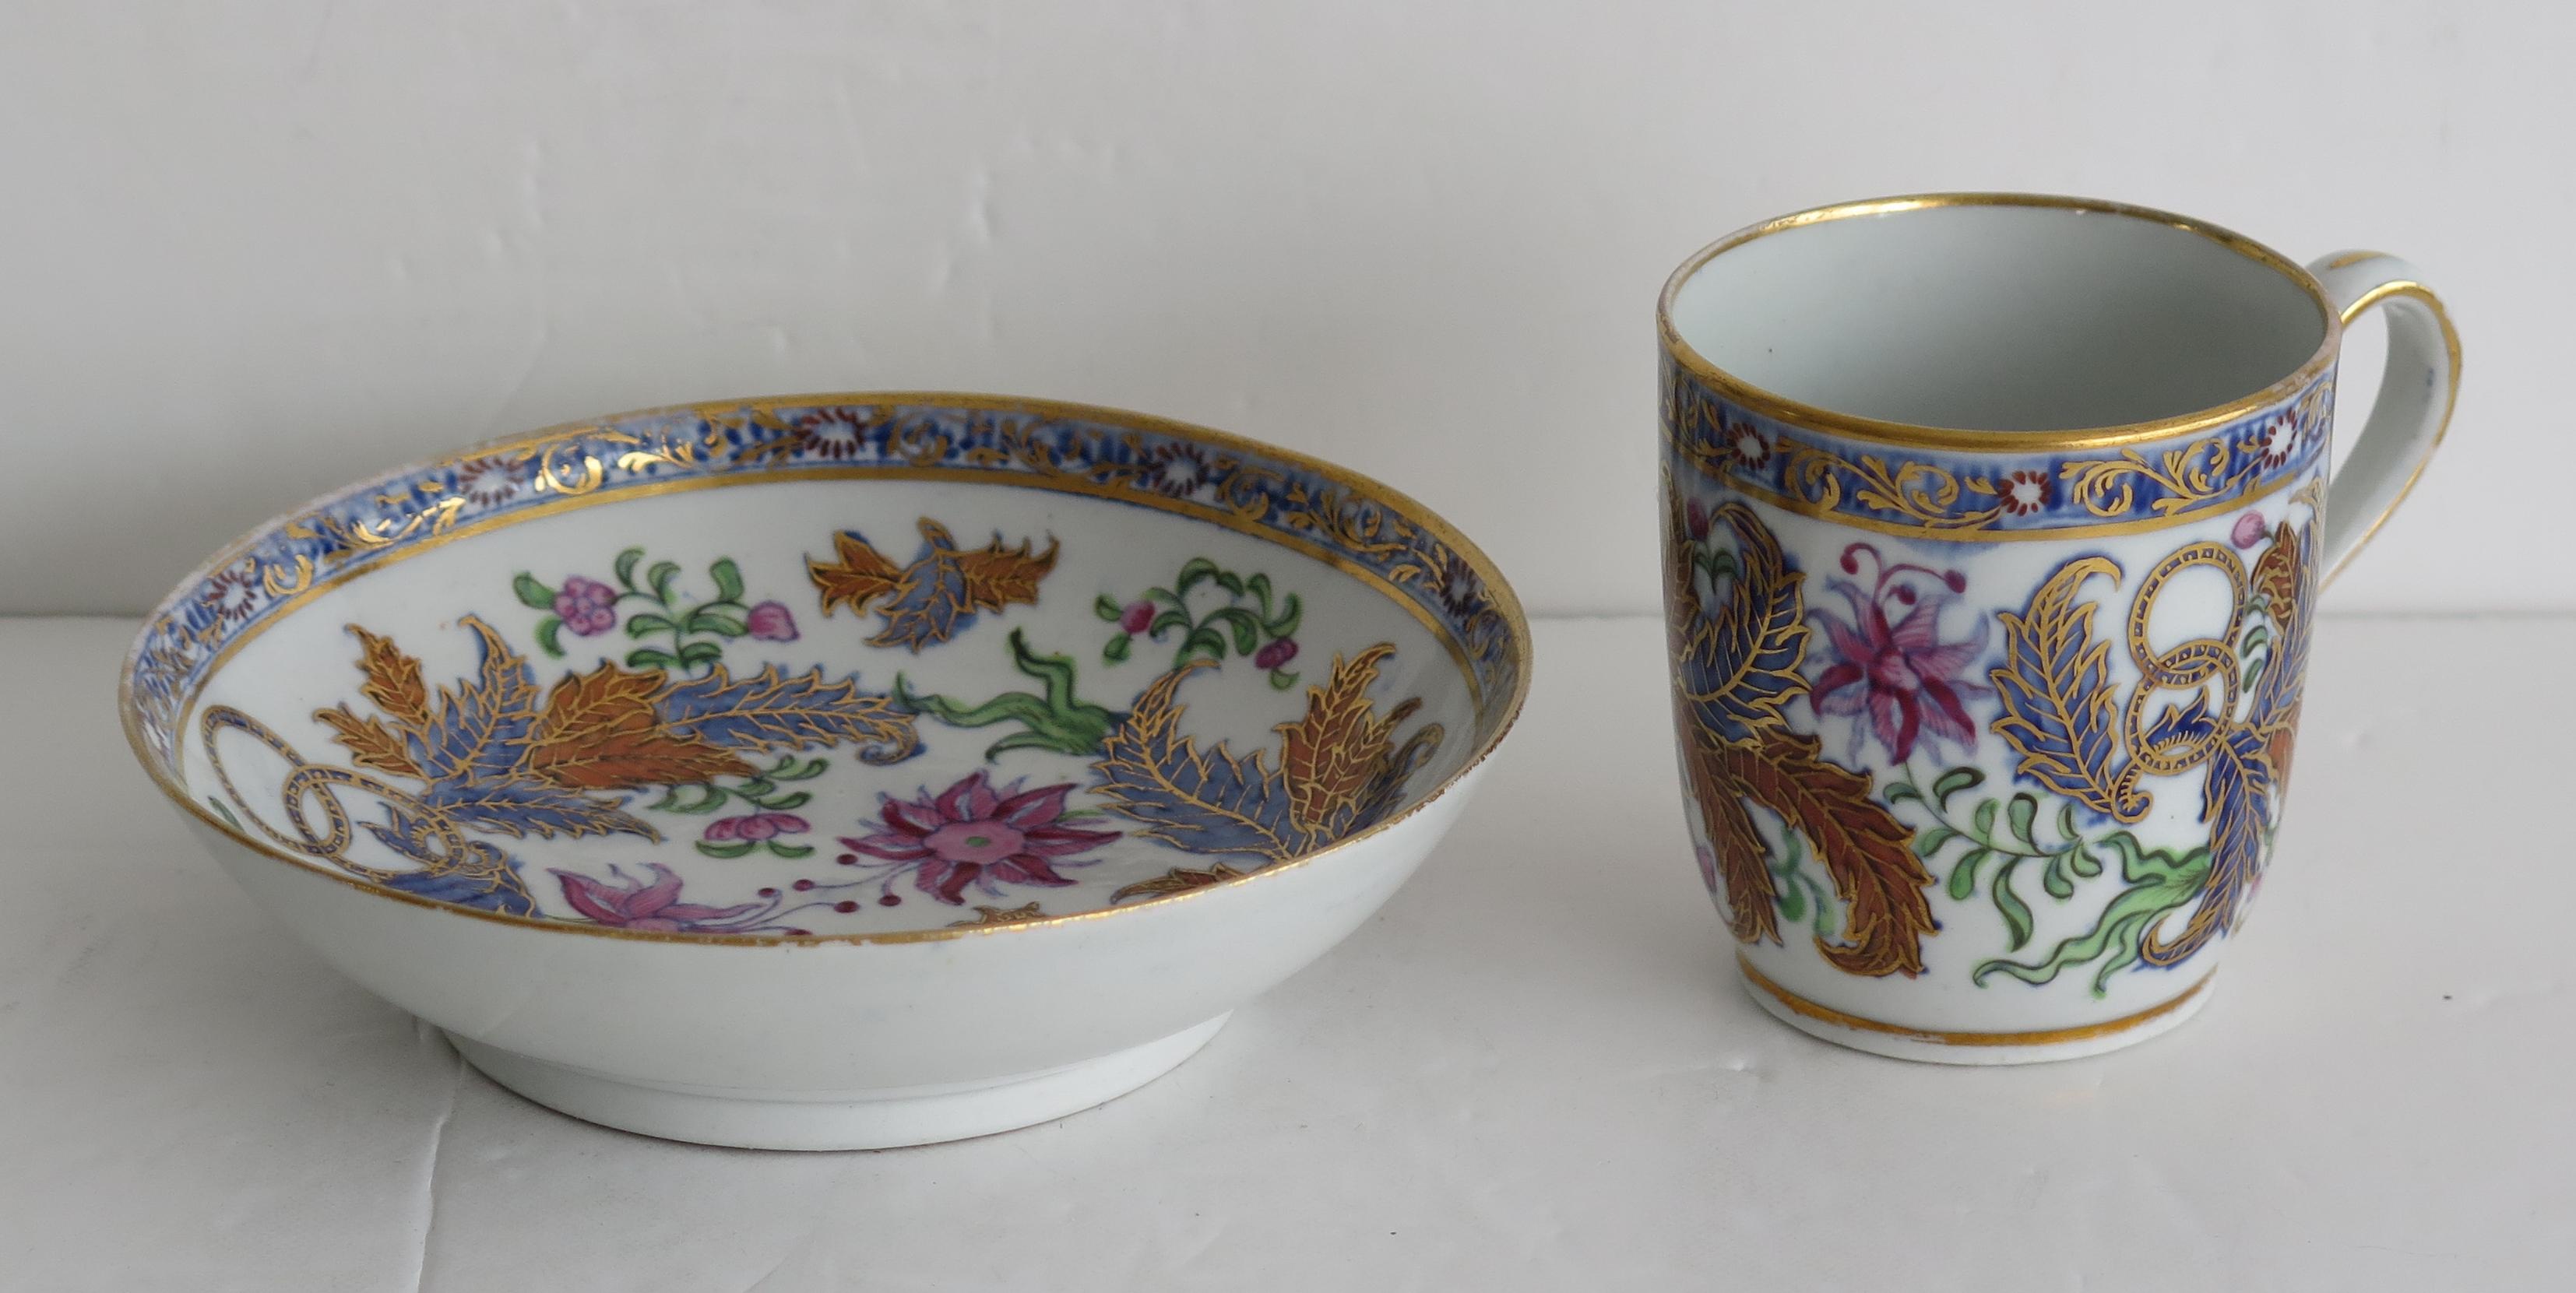 18th Century Newhall Porcelain Duo Coffee Cup and Saucer Pattern 274, Circa 1795 5